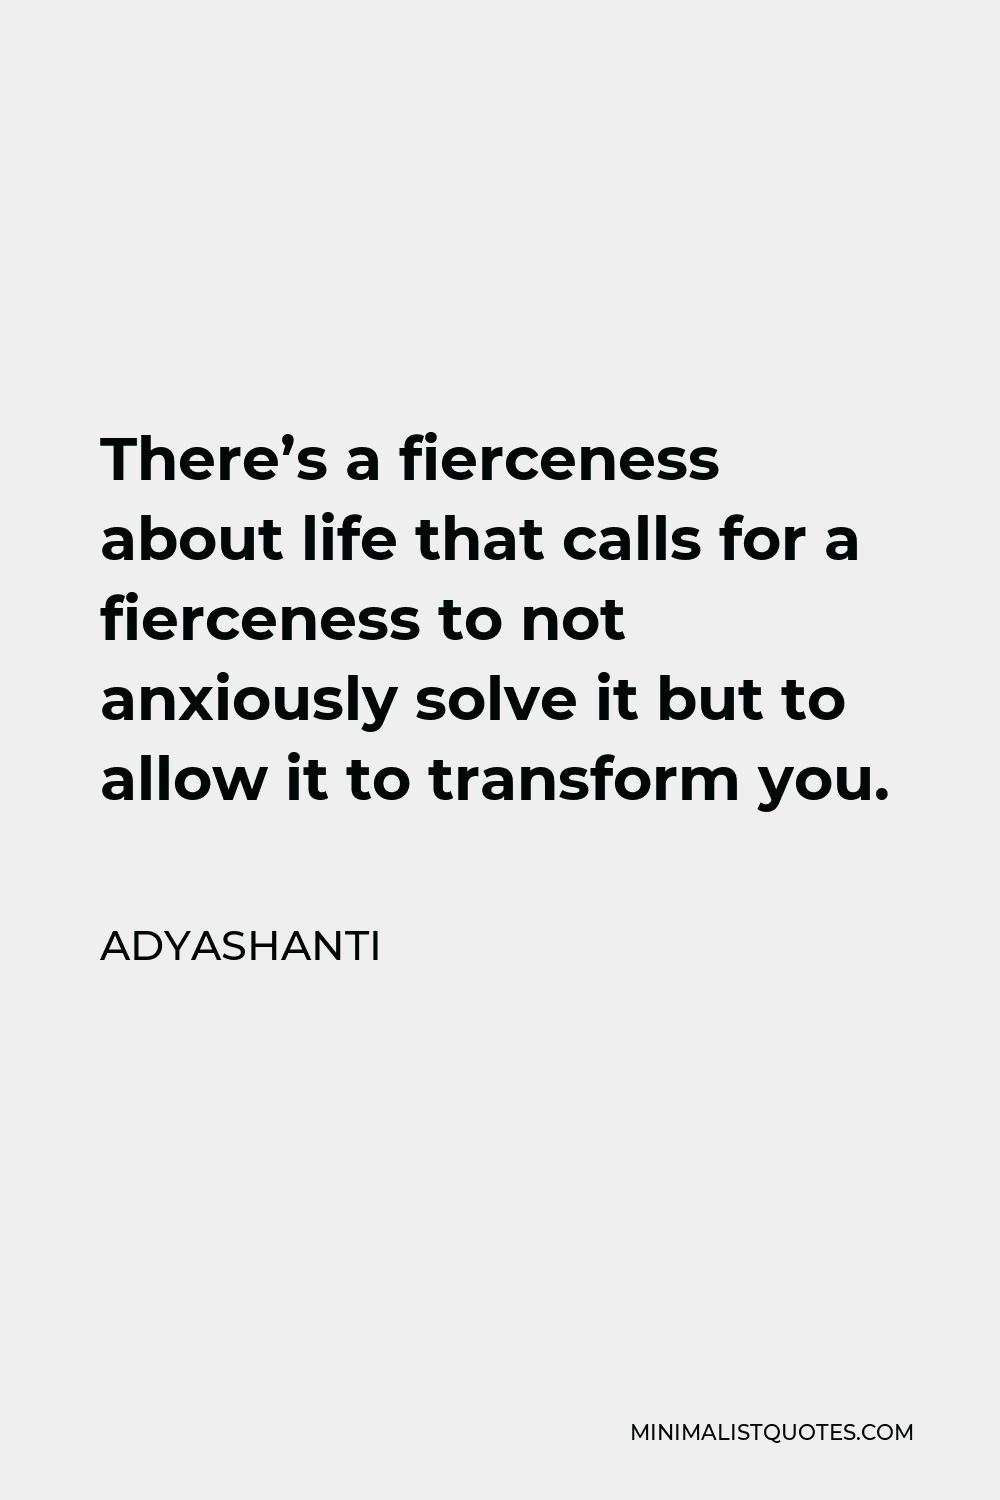 Adyashanti Quote - There’s a fierceness about life that calls for a fierceness to not anxiously solve it but to allow it to transform you.